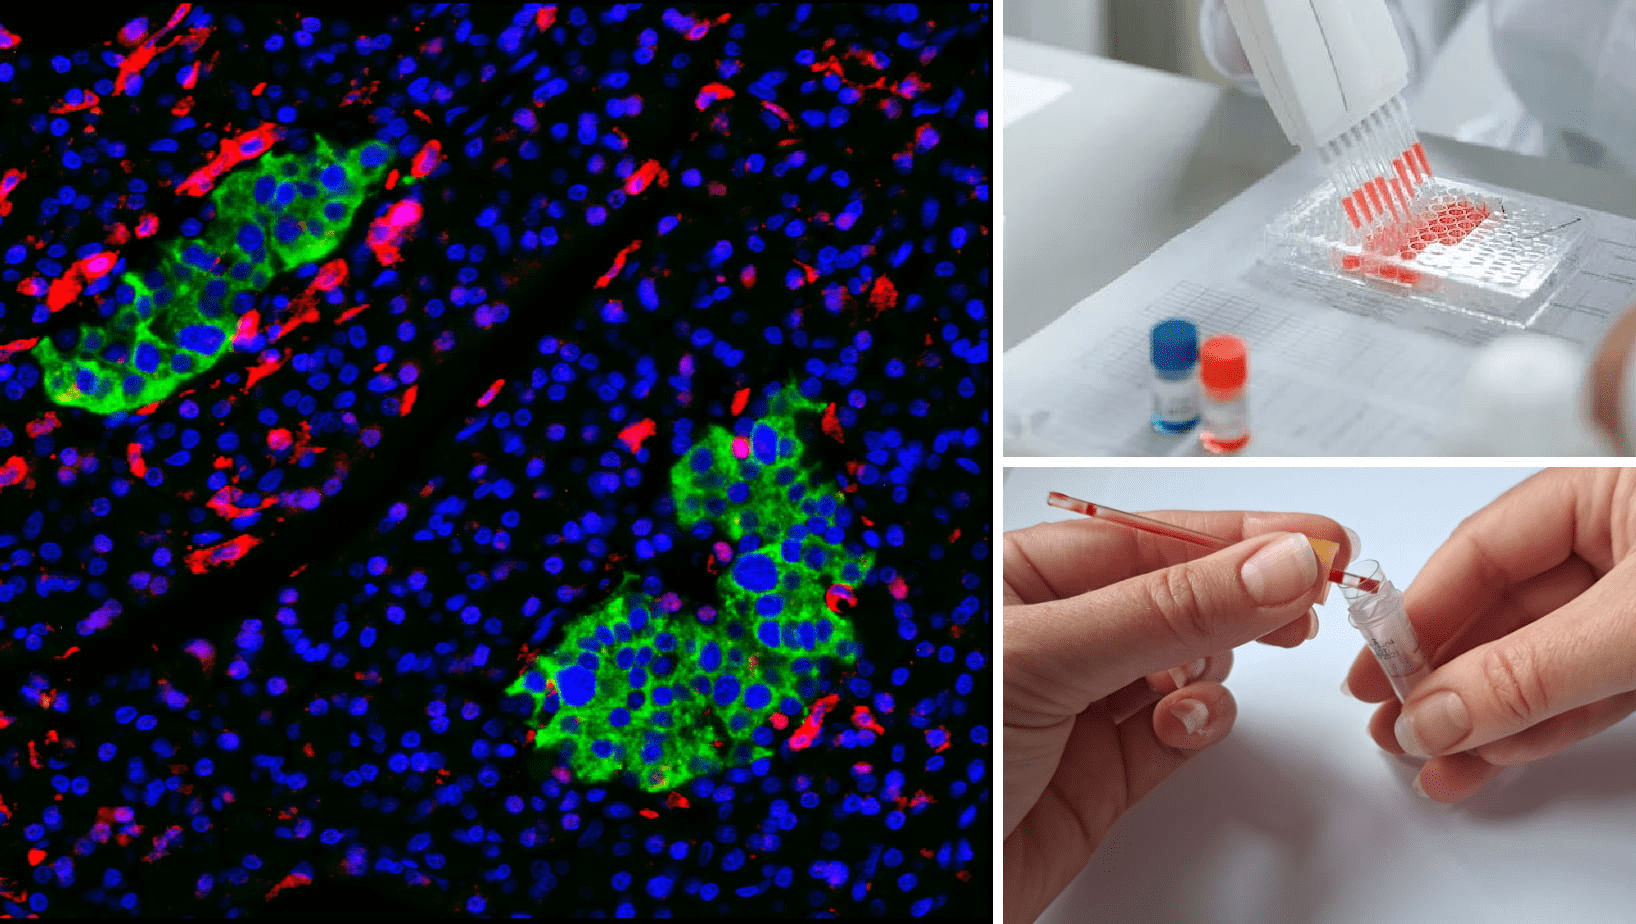 Left : Immune cells (stained red) attacking the insulin producing islet cells (stained green) in the pancreas.Top right : Laboratory scientist using a multi-channel pipette. Bottom right : Removing the feeder straw to the capillary blood collection tube.